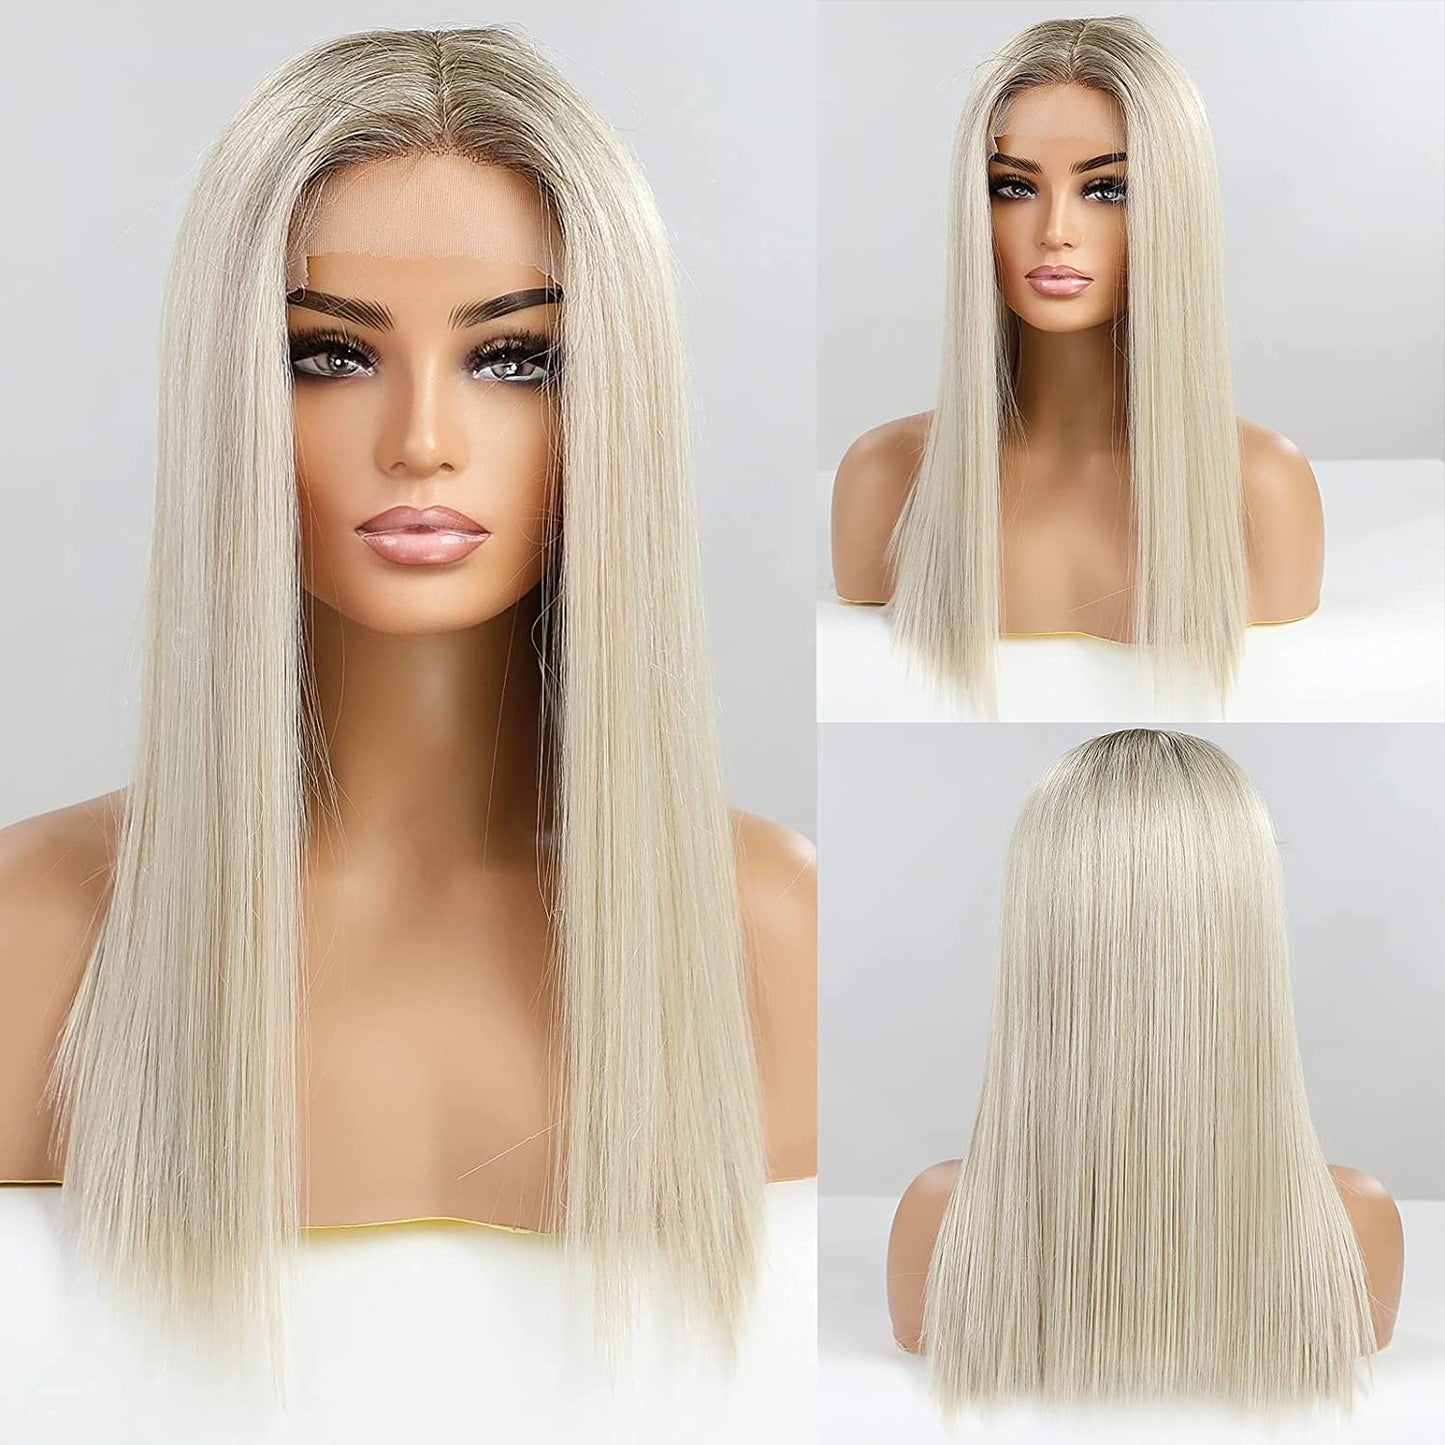 ombre lace front wig,lace wig,synthetic wigs,straight wigs,straight hair wig,wig synthetic,best synthetic wigs,hair wig,lace front wigs for white women wigs for women,hair wigs for women,blonde lace front wigs,blonde synthetic lace front wig,synthetic lace front wigs for women,lace synthetic hair wigs,wigs synthetic hair,long lace front wig straight wigs for women,wigs straight hair,wigs straight,lace synthetic blonde wig,ombre plantium blonde lace front wig